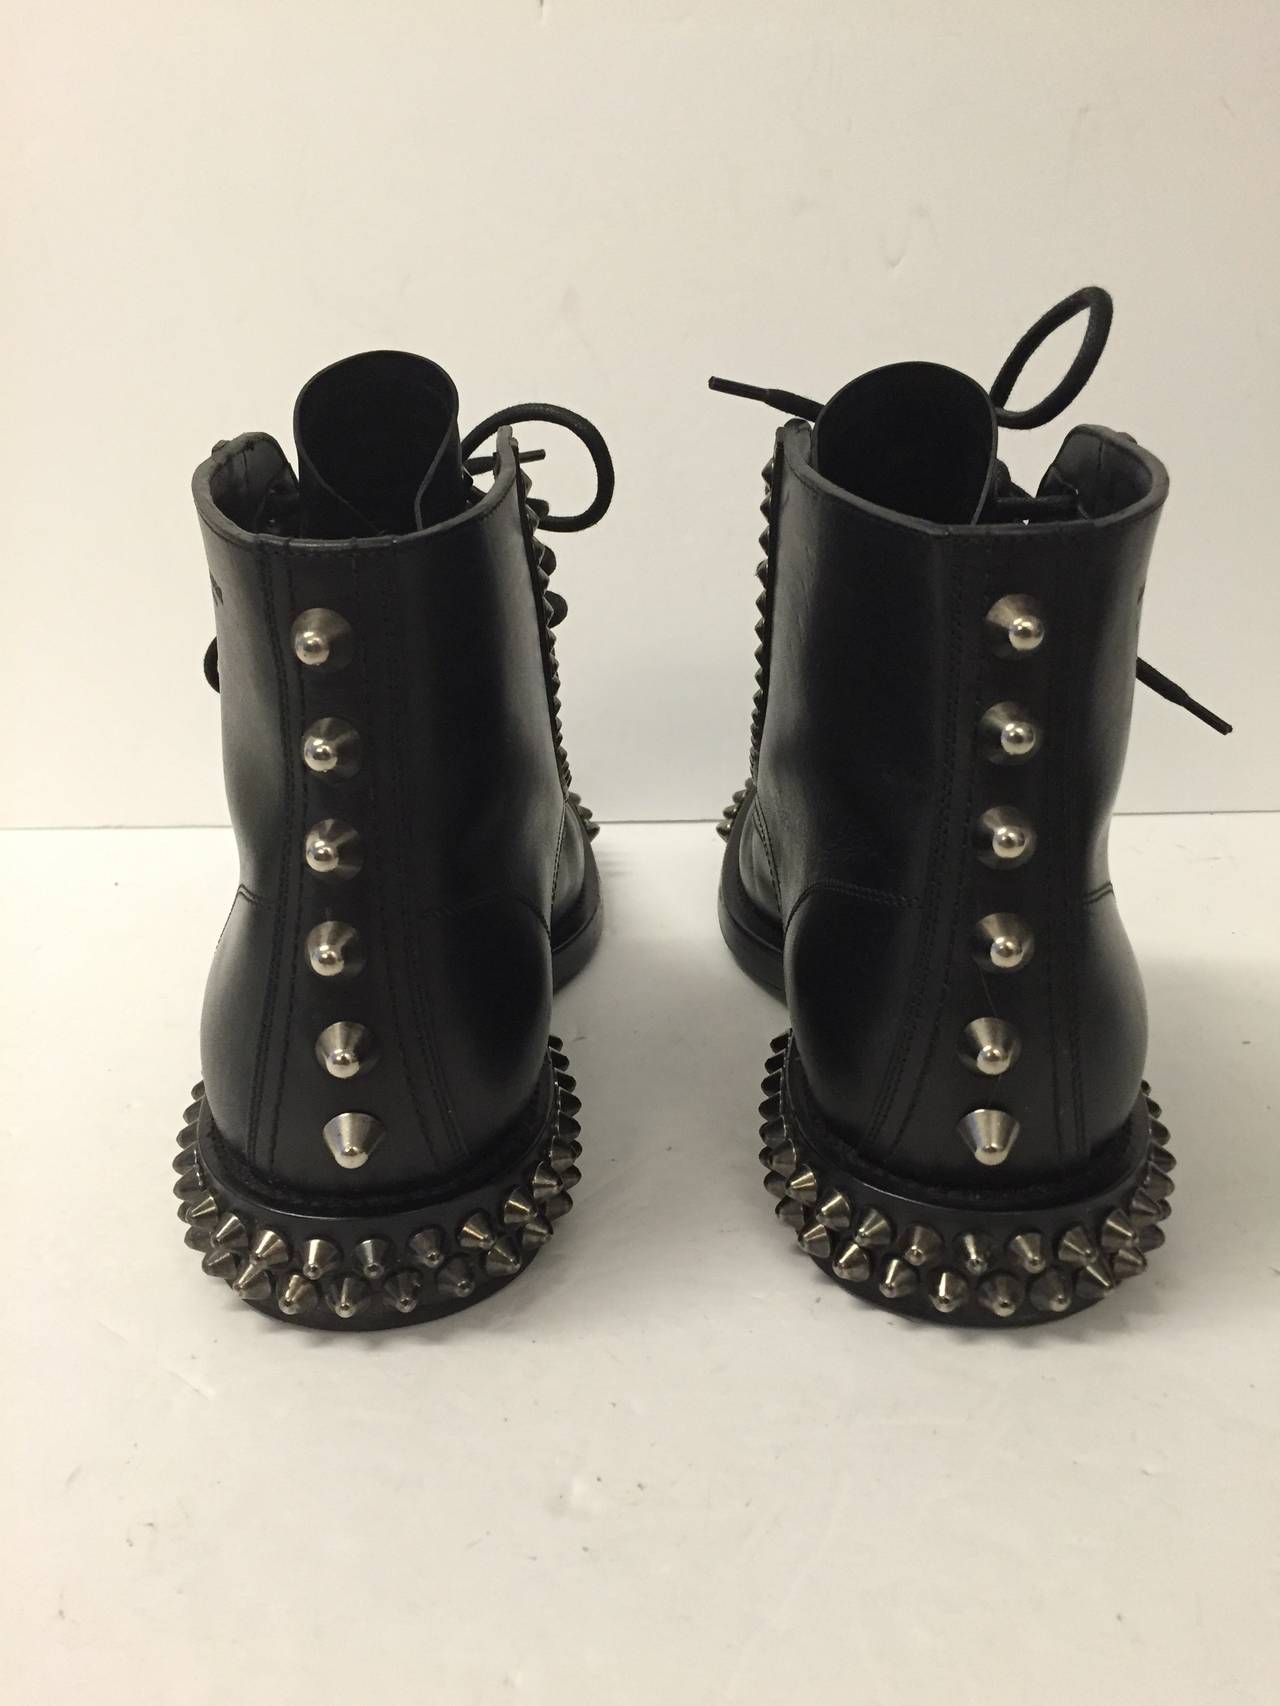 Saint Laurent Black Spiked Leather Lace Up Ranger Boots In Excellent Condition For Sale In Westmount, Quebec